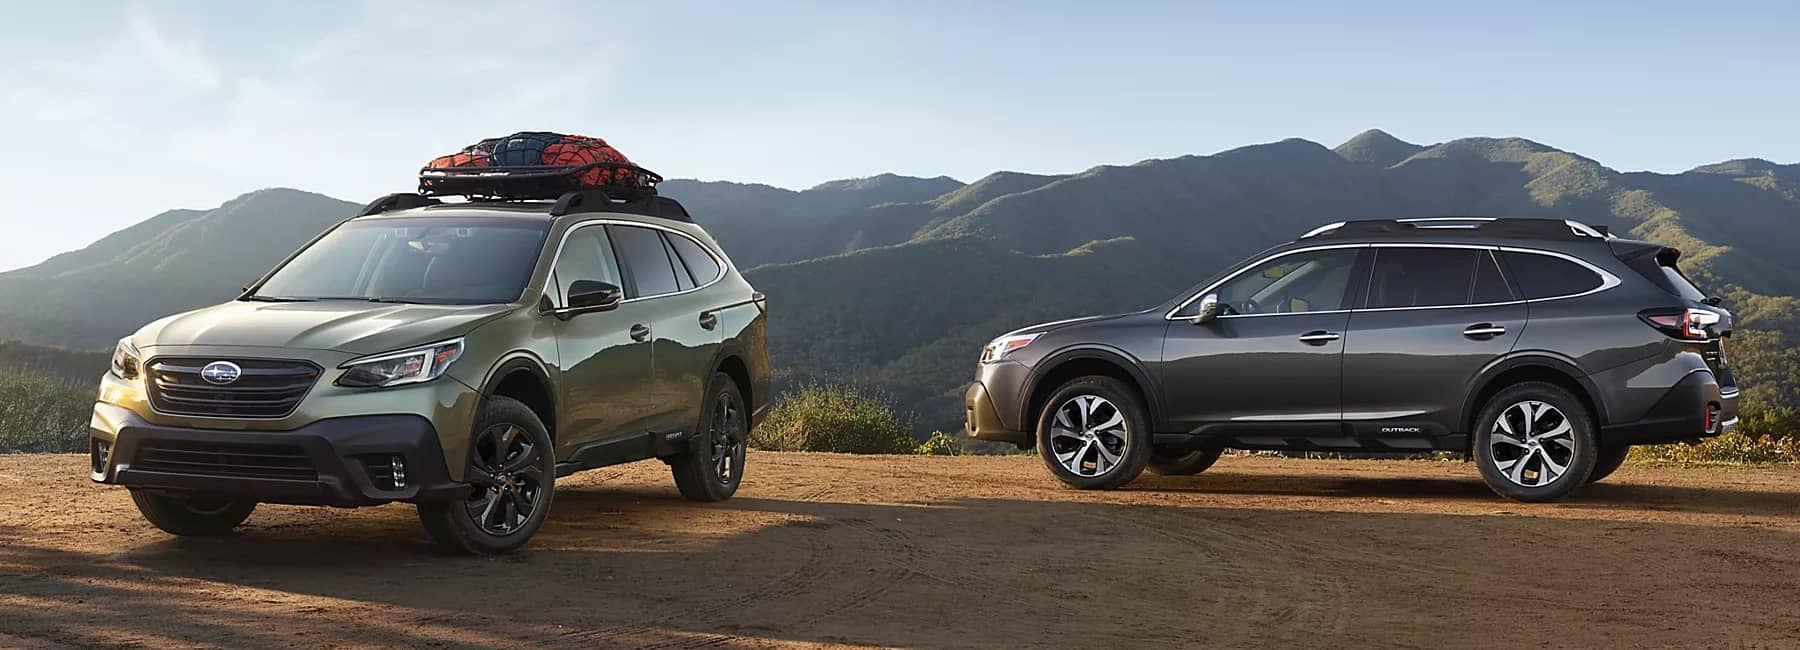 2022 Subaru Outback 2 parked cars in mountain range background